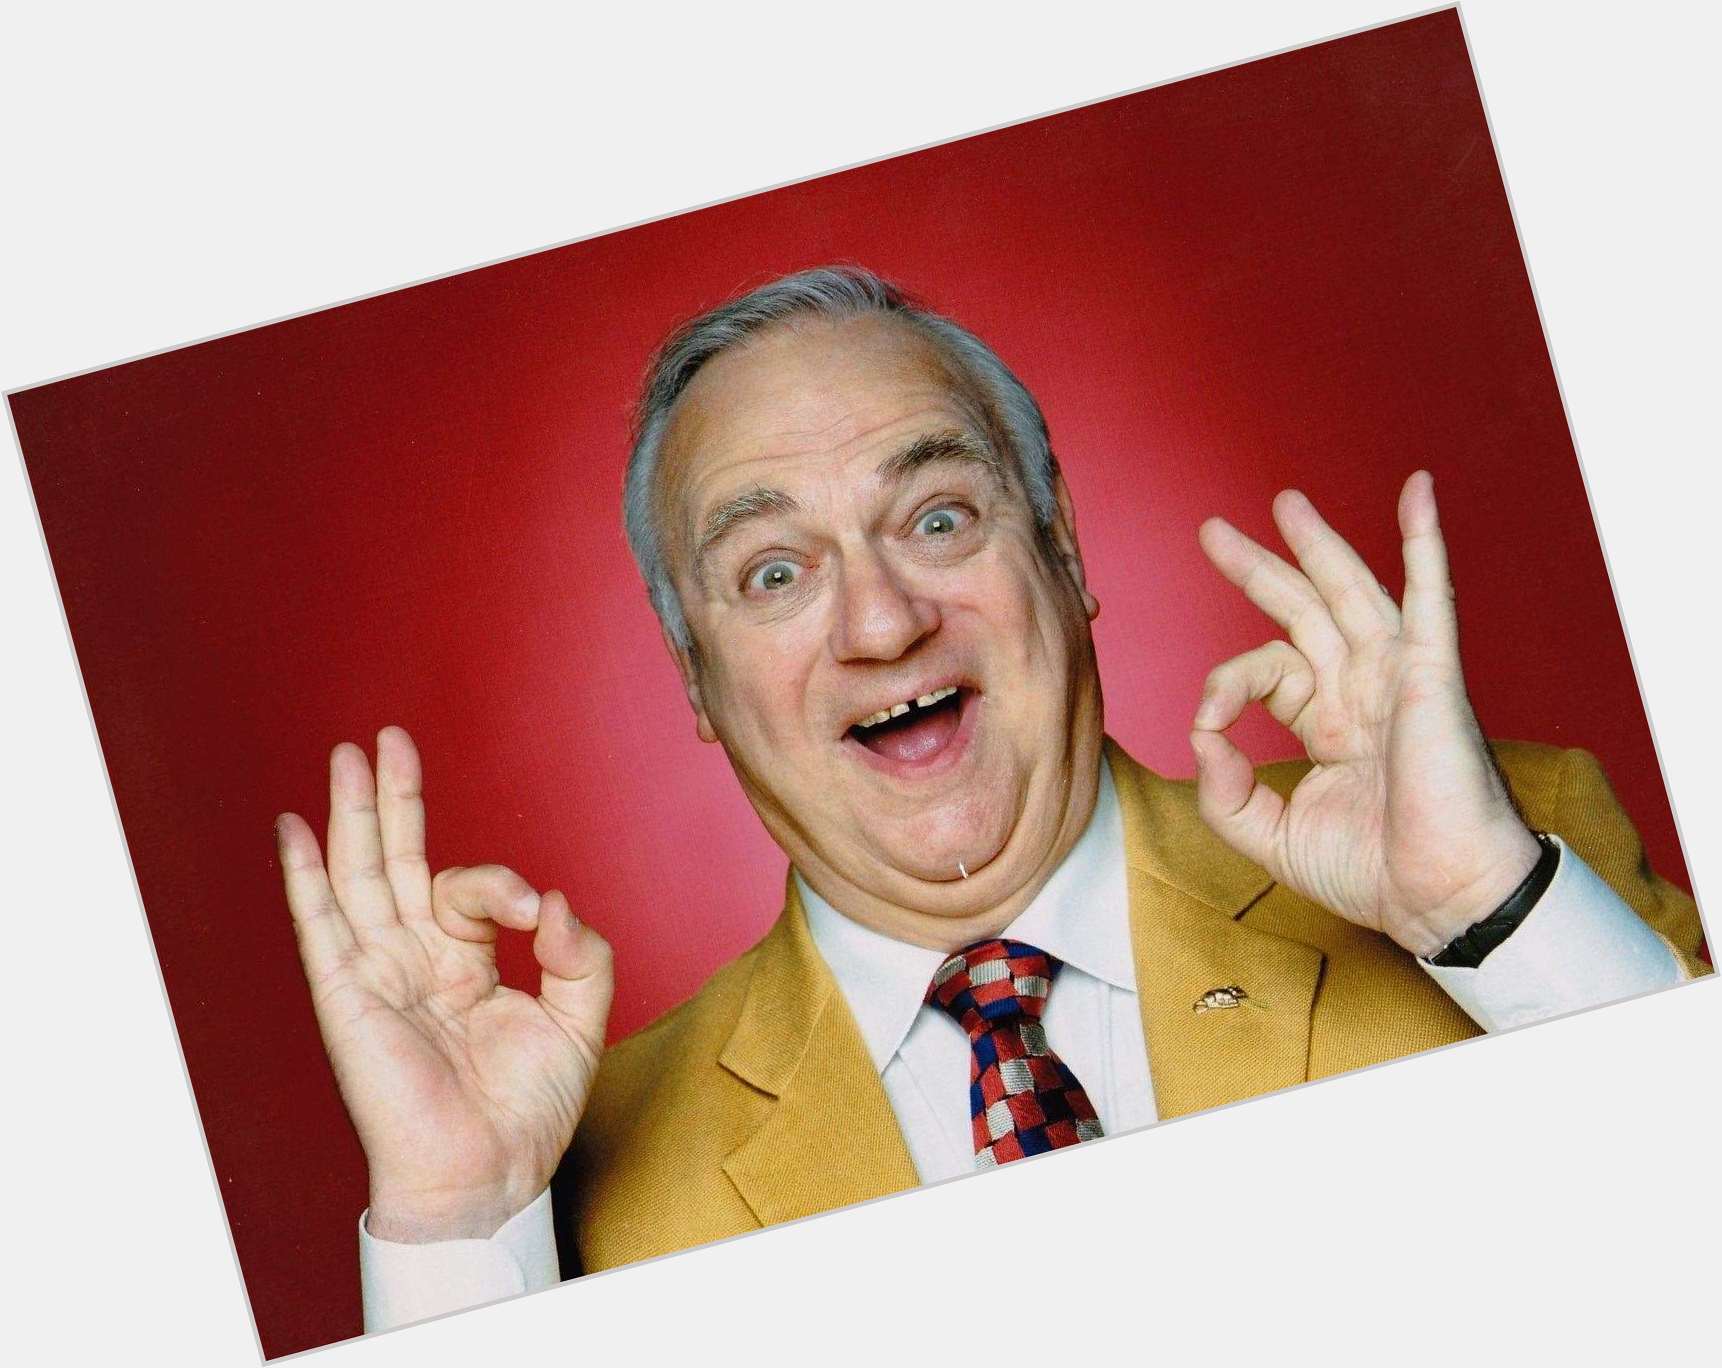 <a href="/hot-men/roy-hudd/is-he-still-alive-where-appearing-tall">Roy Hudd</a> Large body,  grey hair & hairstyles